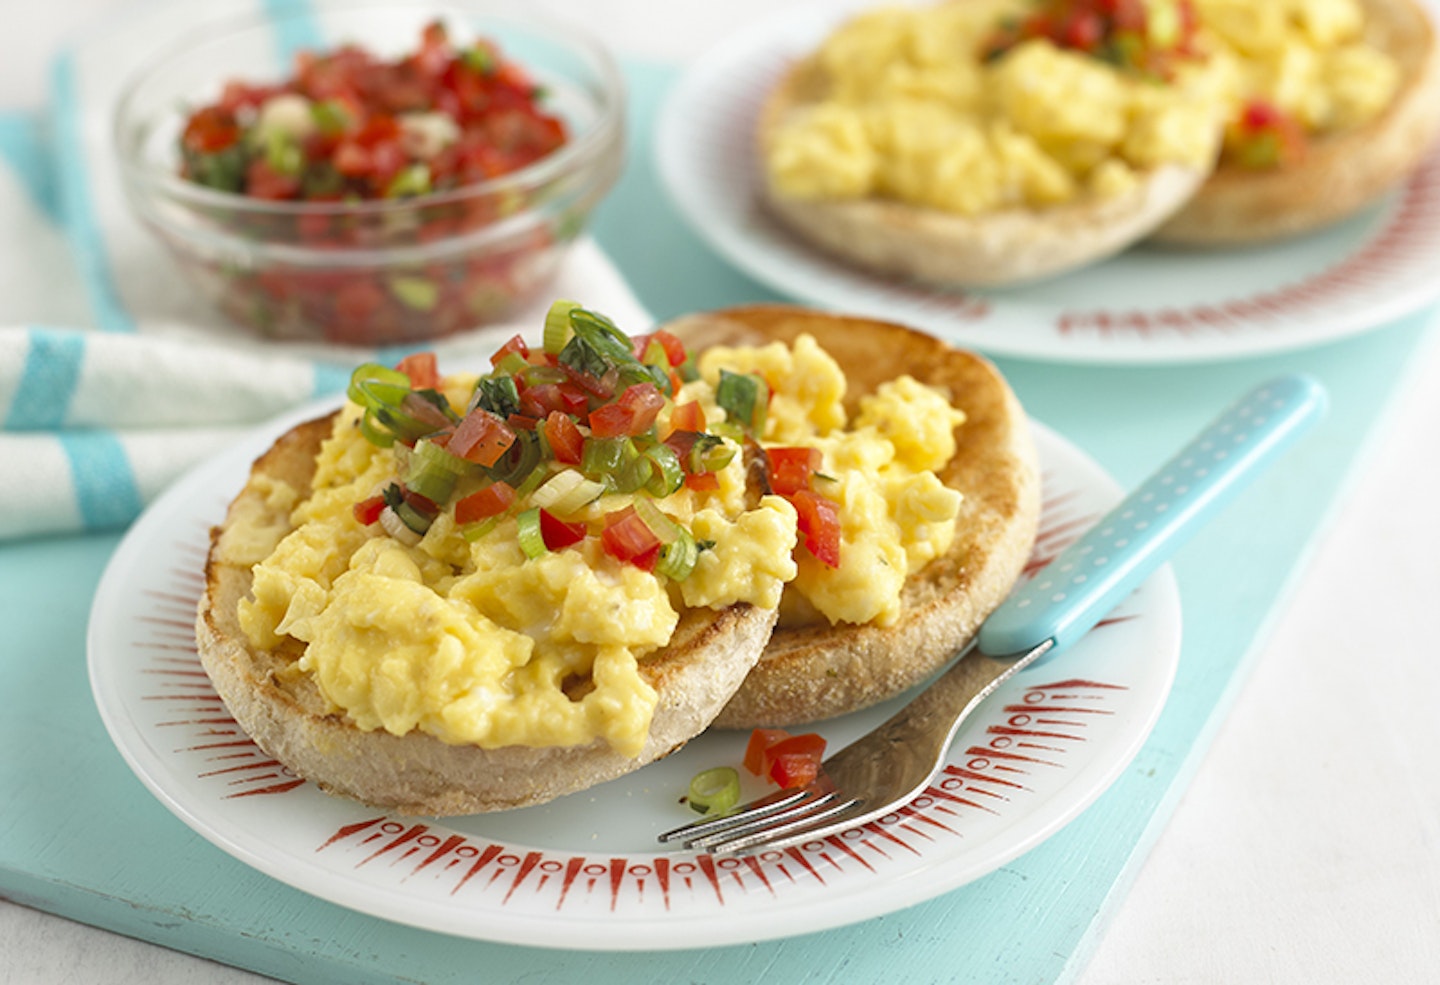 Scrambled egg with tomato and salsa on an English muffin by Annabel Karmel